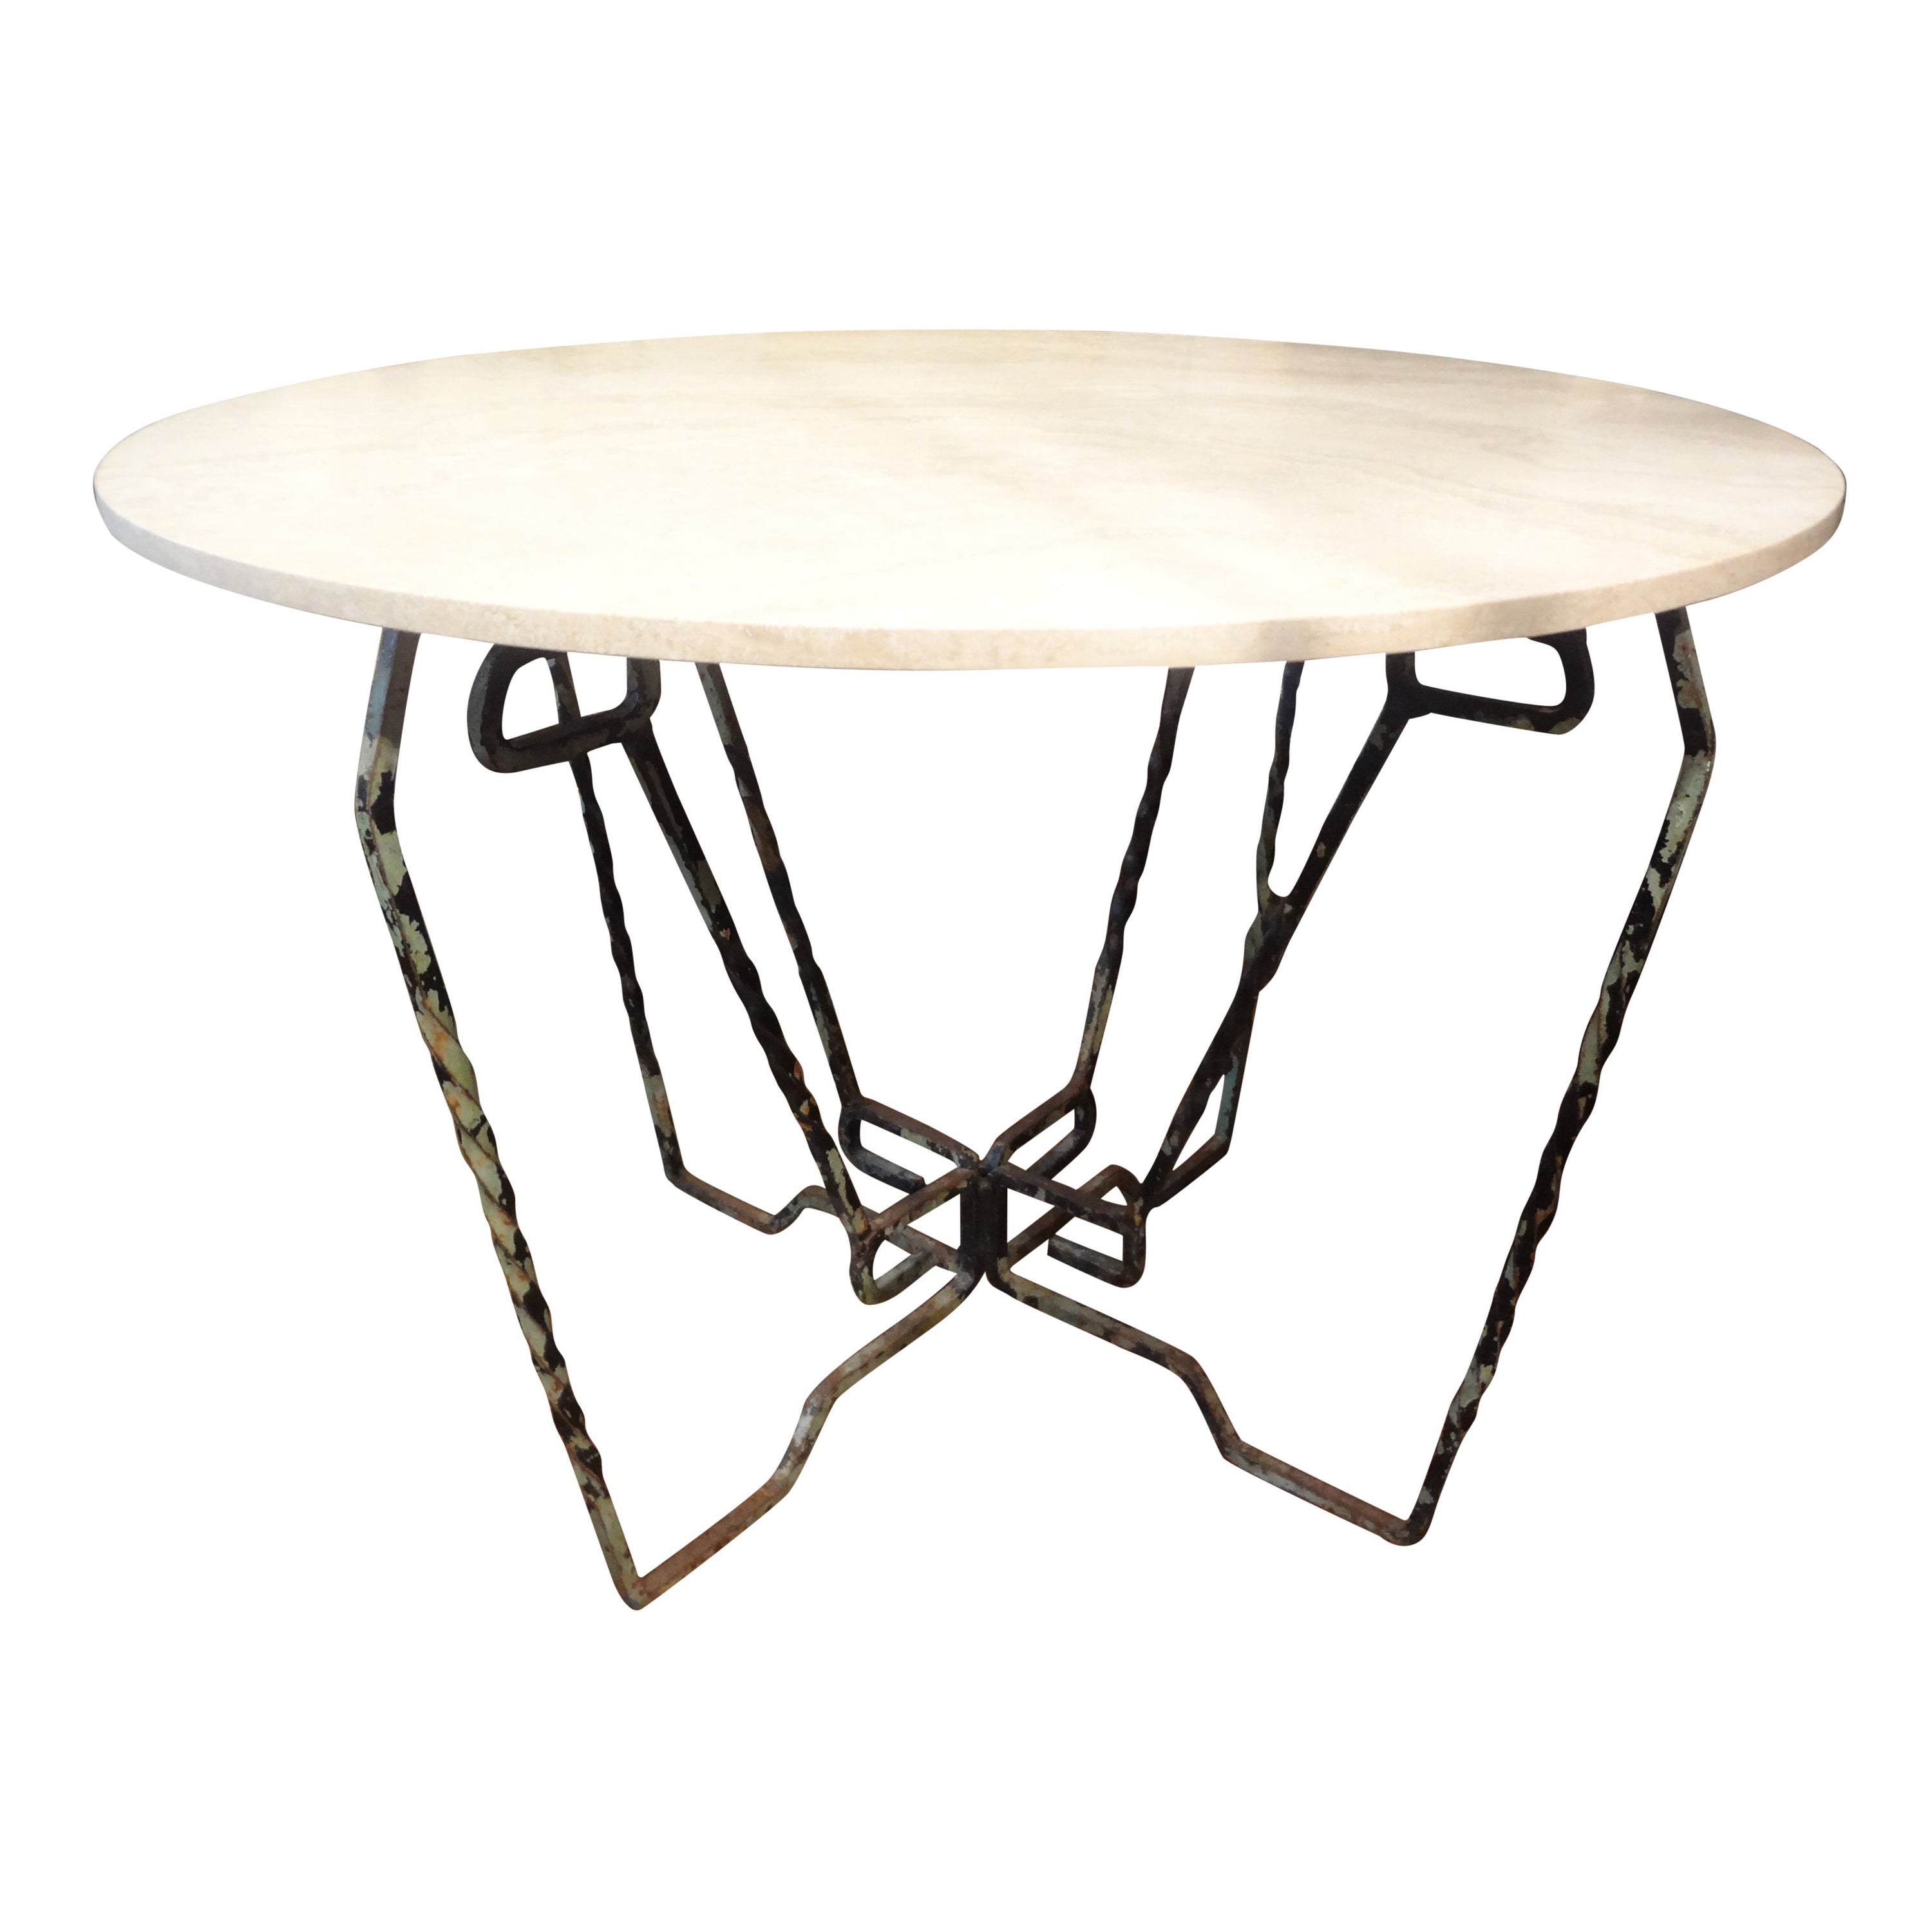 French Wrought Iron Center Table with Travertine Top